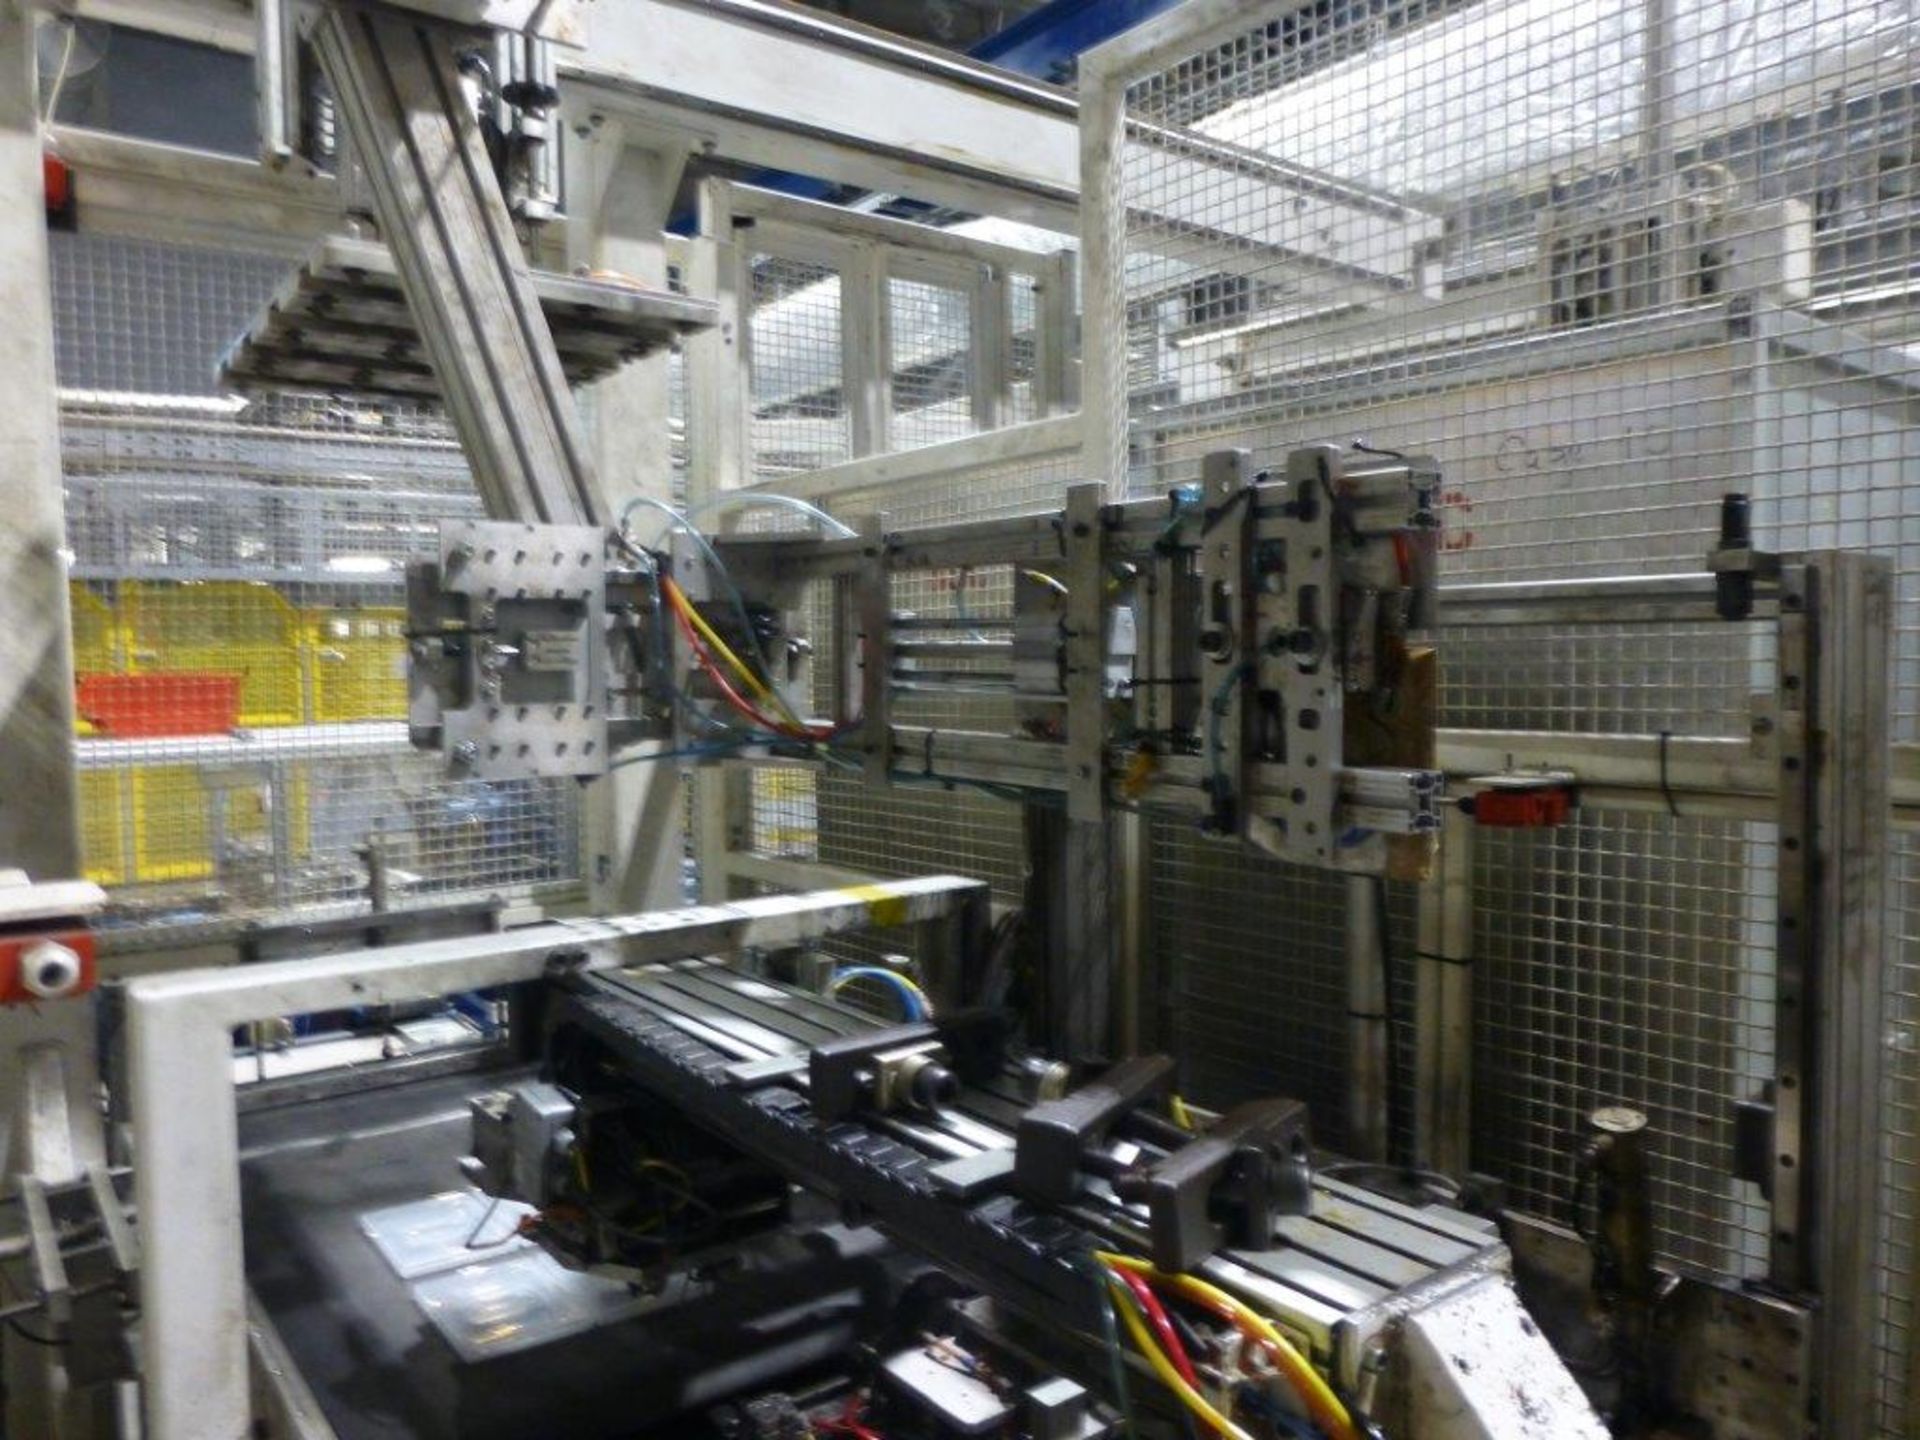 Mechatronic Solutions Type MSP 7 automated DVD case twin arm picking/stacking system, plant No 10293 - Image 2 of 7